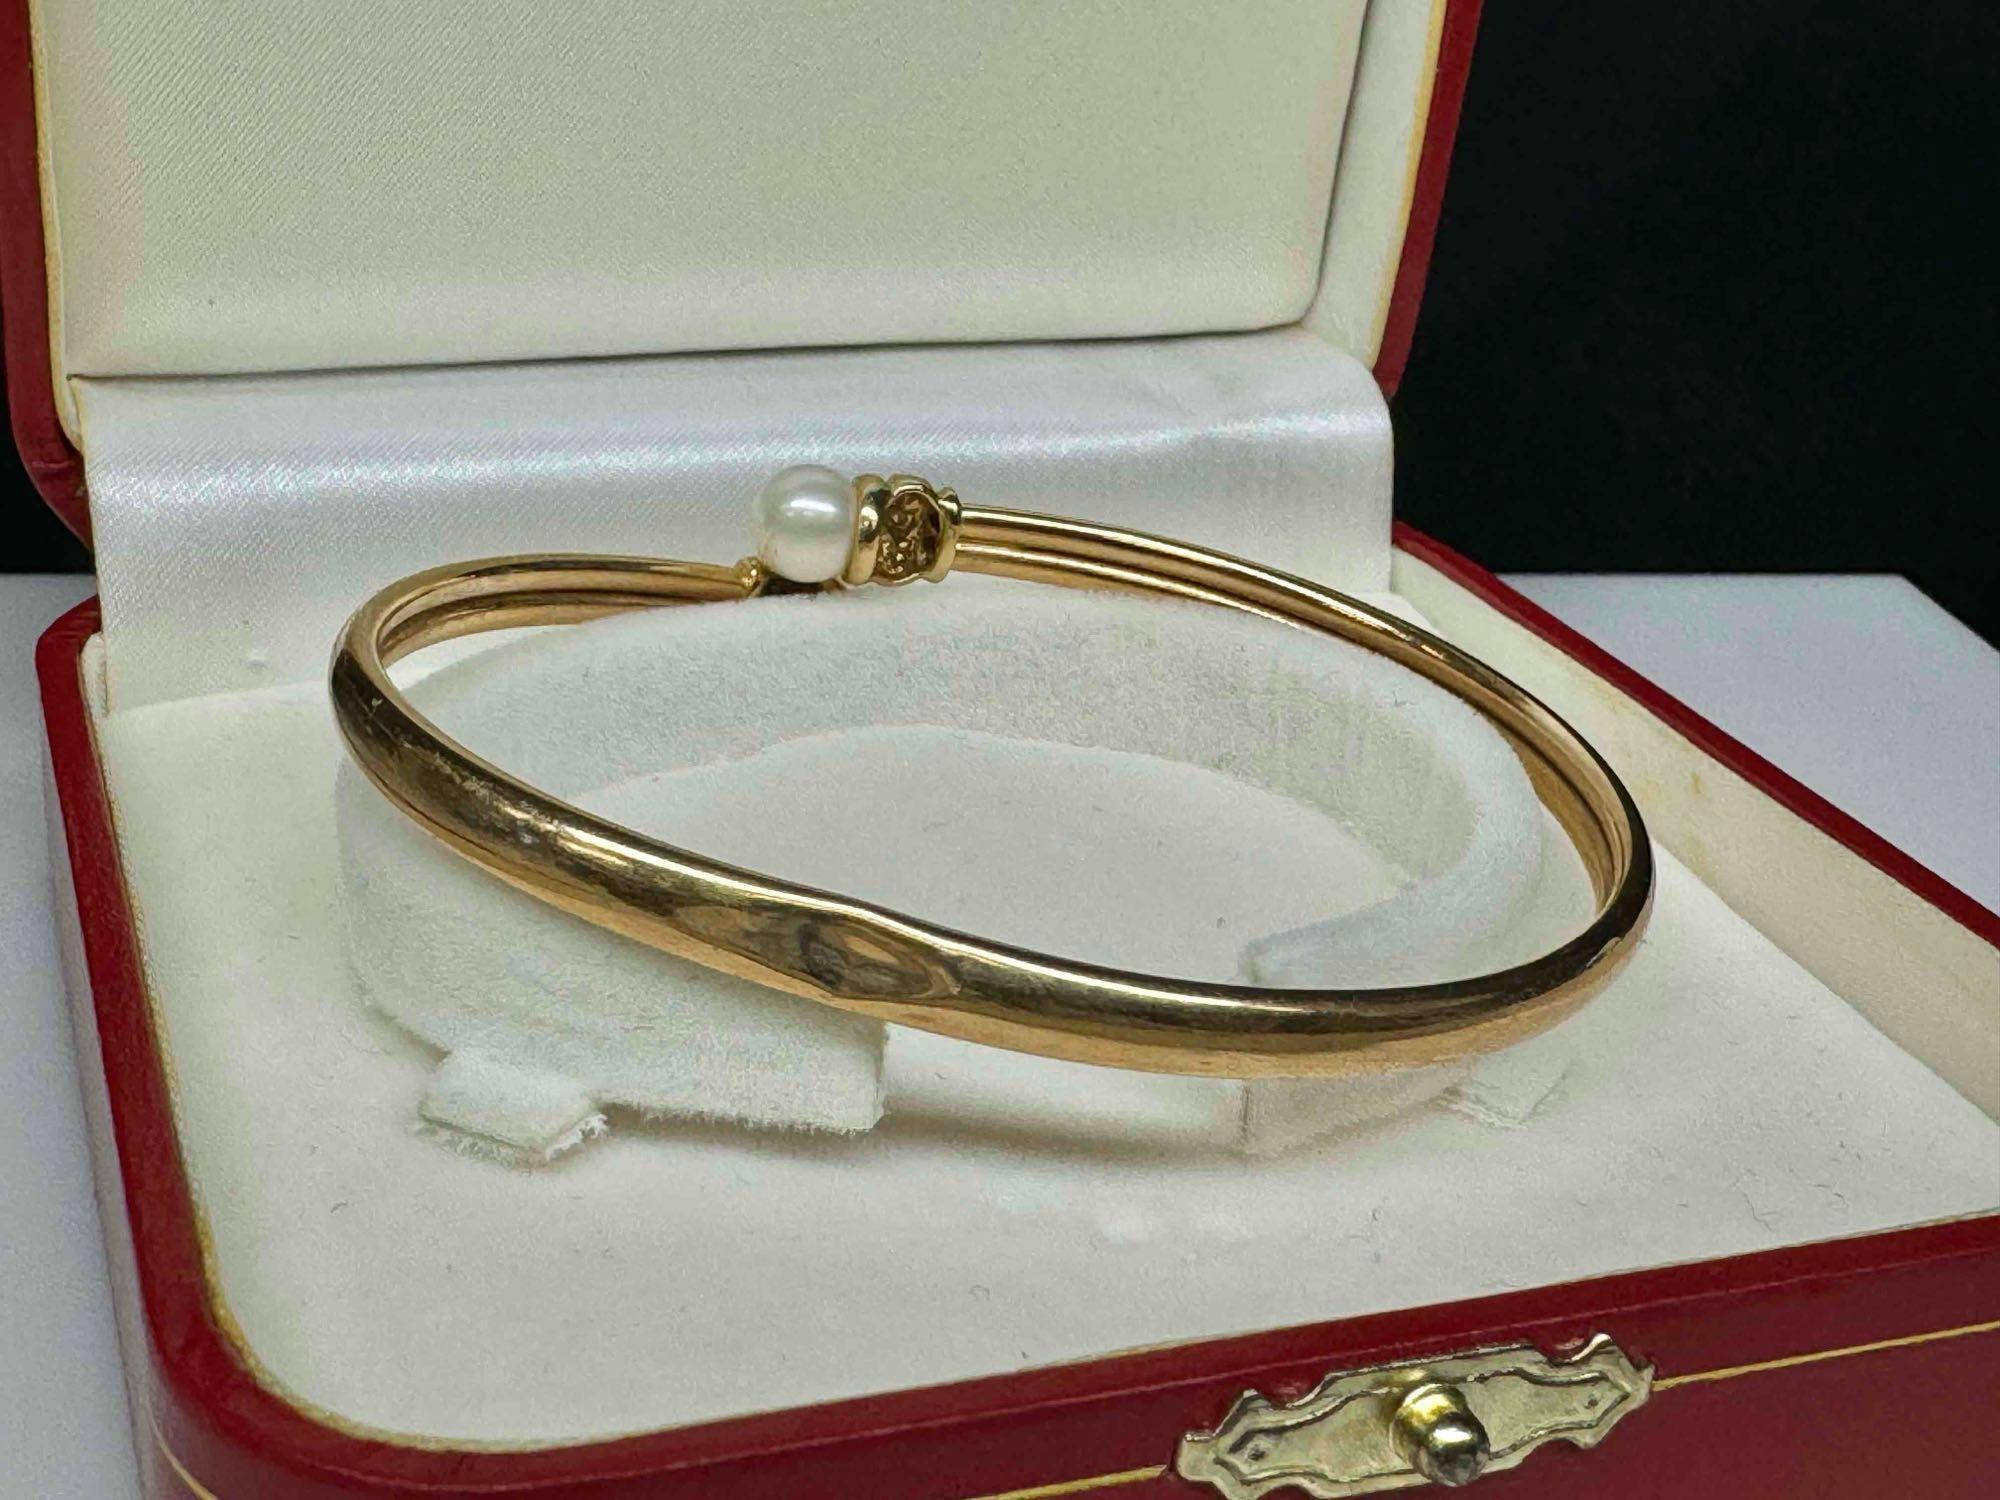 Fancy 10k Gold Diamond and Pearl Bracelet with Box 5.7g total